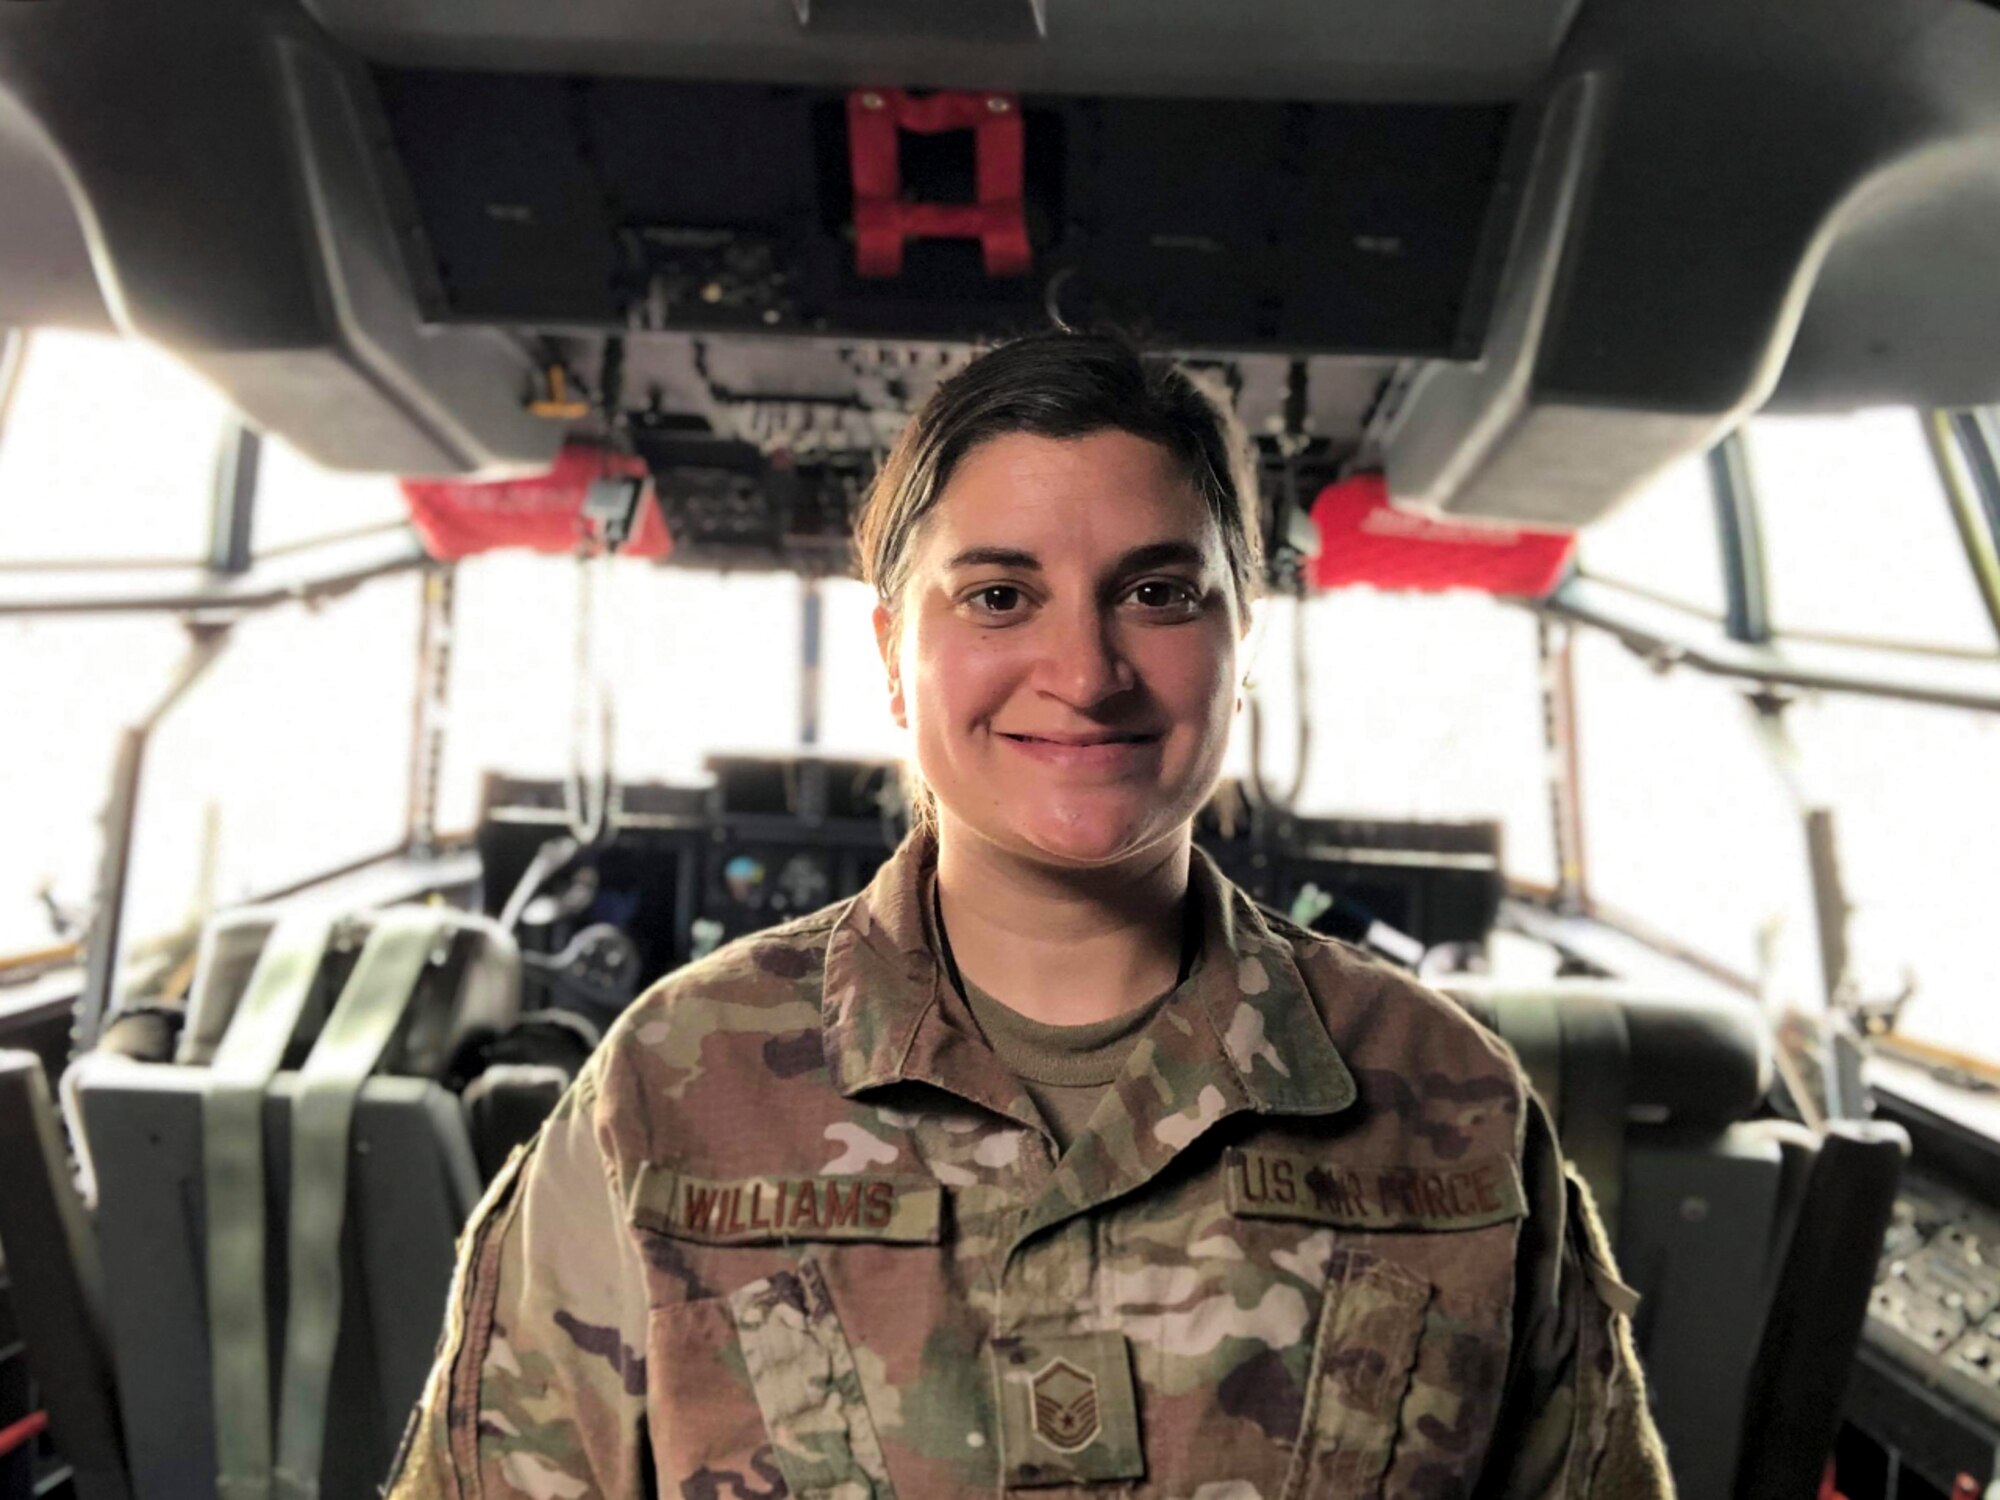 Master Sgt. Katie Williams, 803rd Aircraft Maintenance Squadron instrument and flight control systems craftsman, poses for a photo Feb. 10 on the flight deck of a C-130J Super Hercules aircraft. Williams was the wing’s SNCO of the 4th quarter recipient. (Courtesy photo)